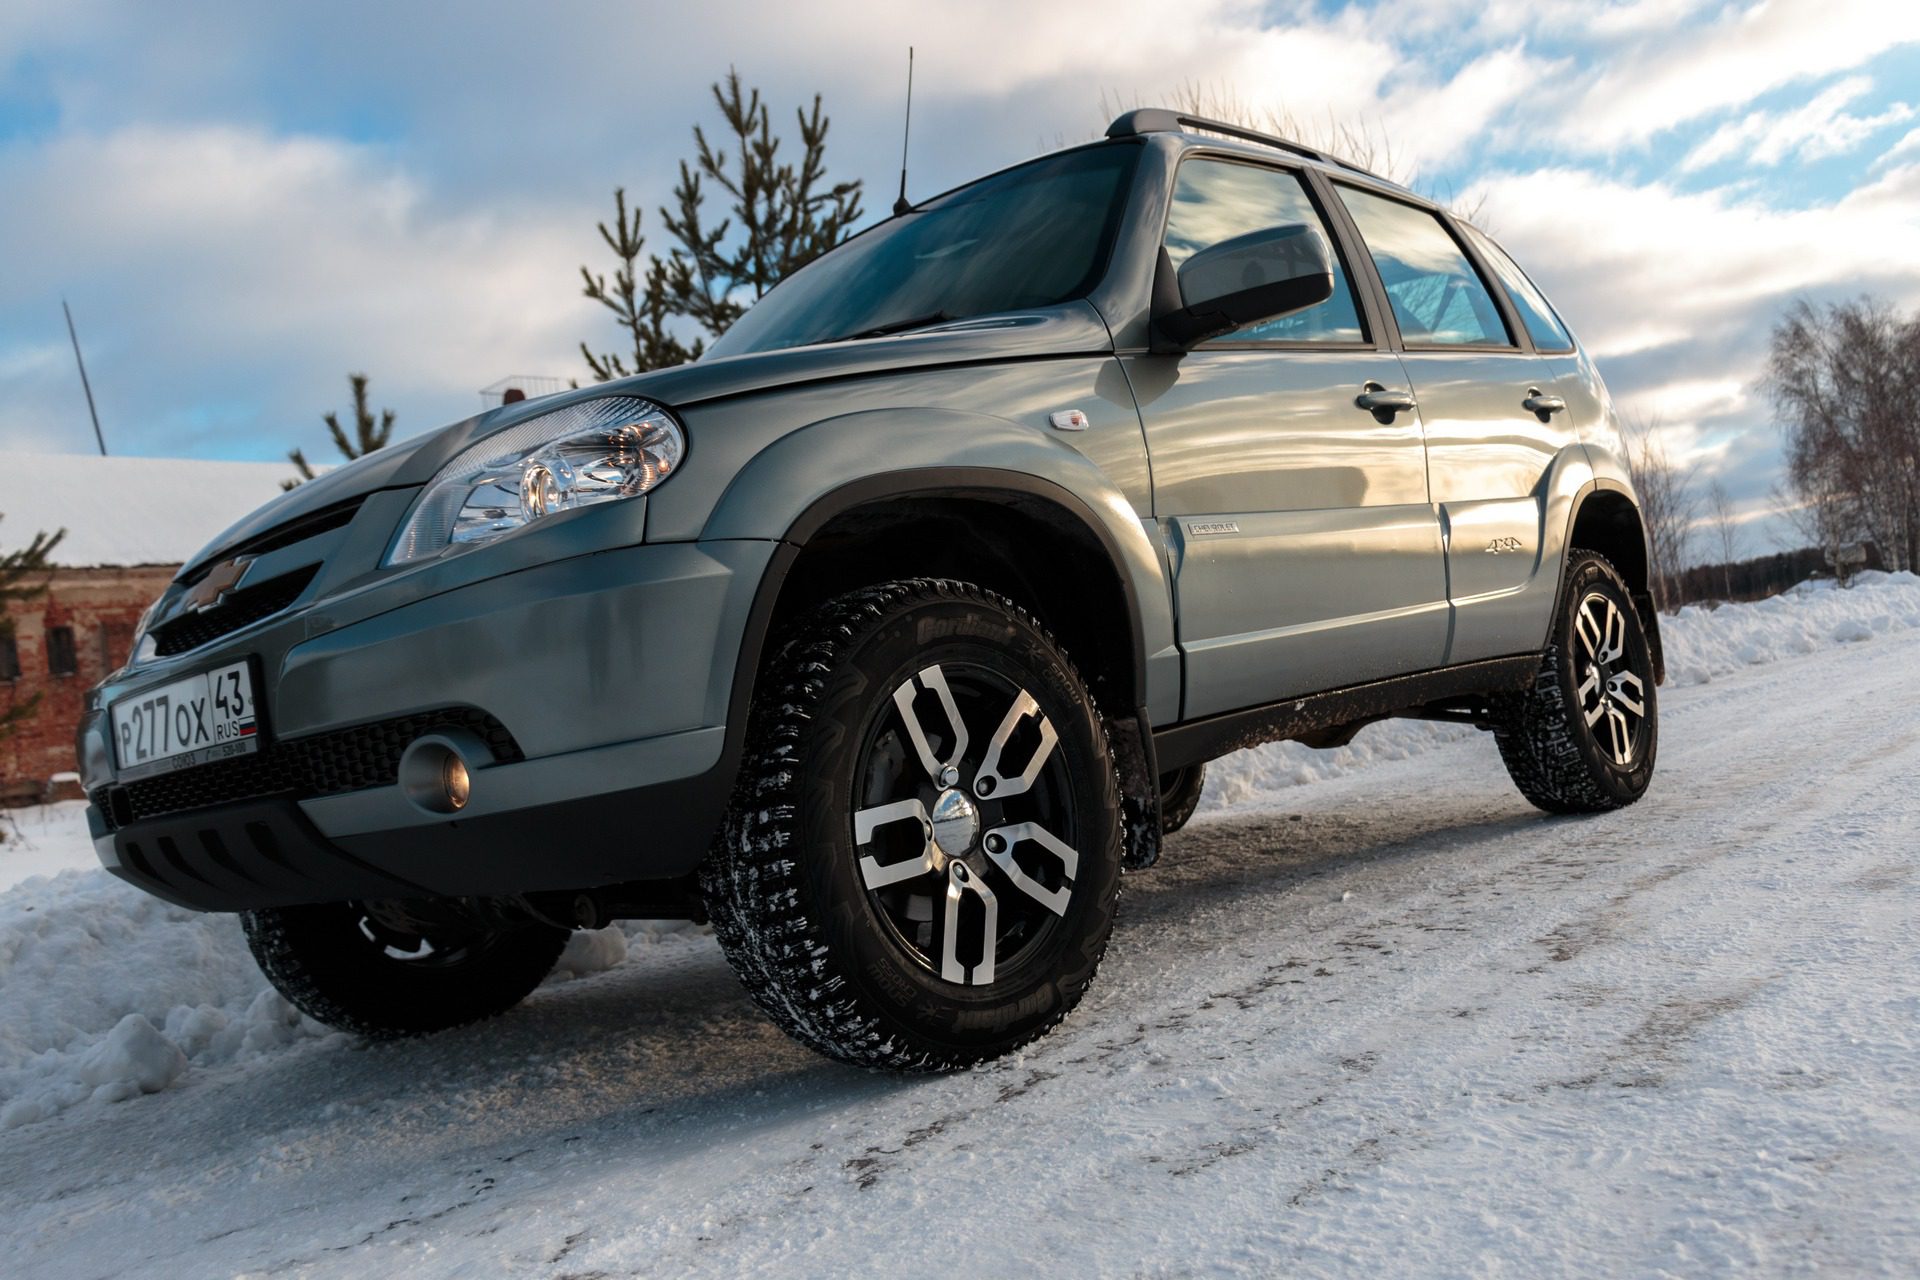 4WD vs. AWD: What’s the Difference? (updated)